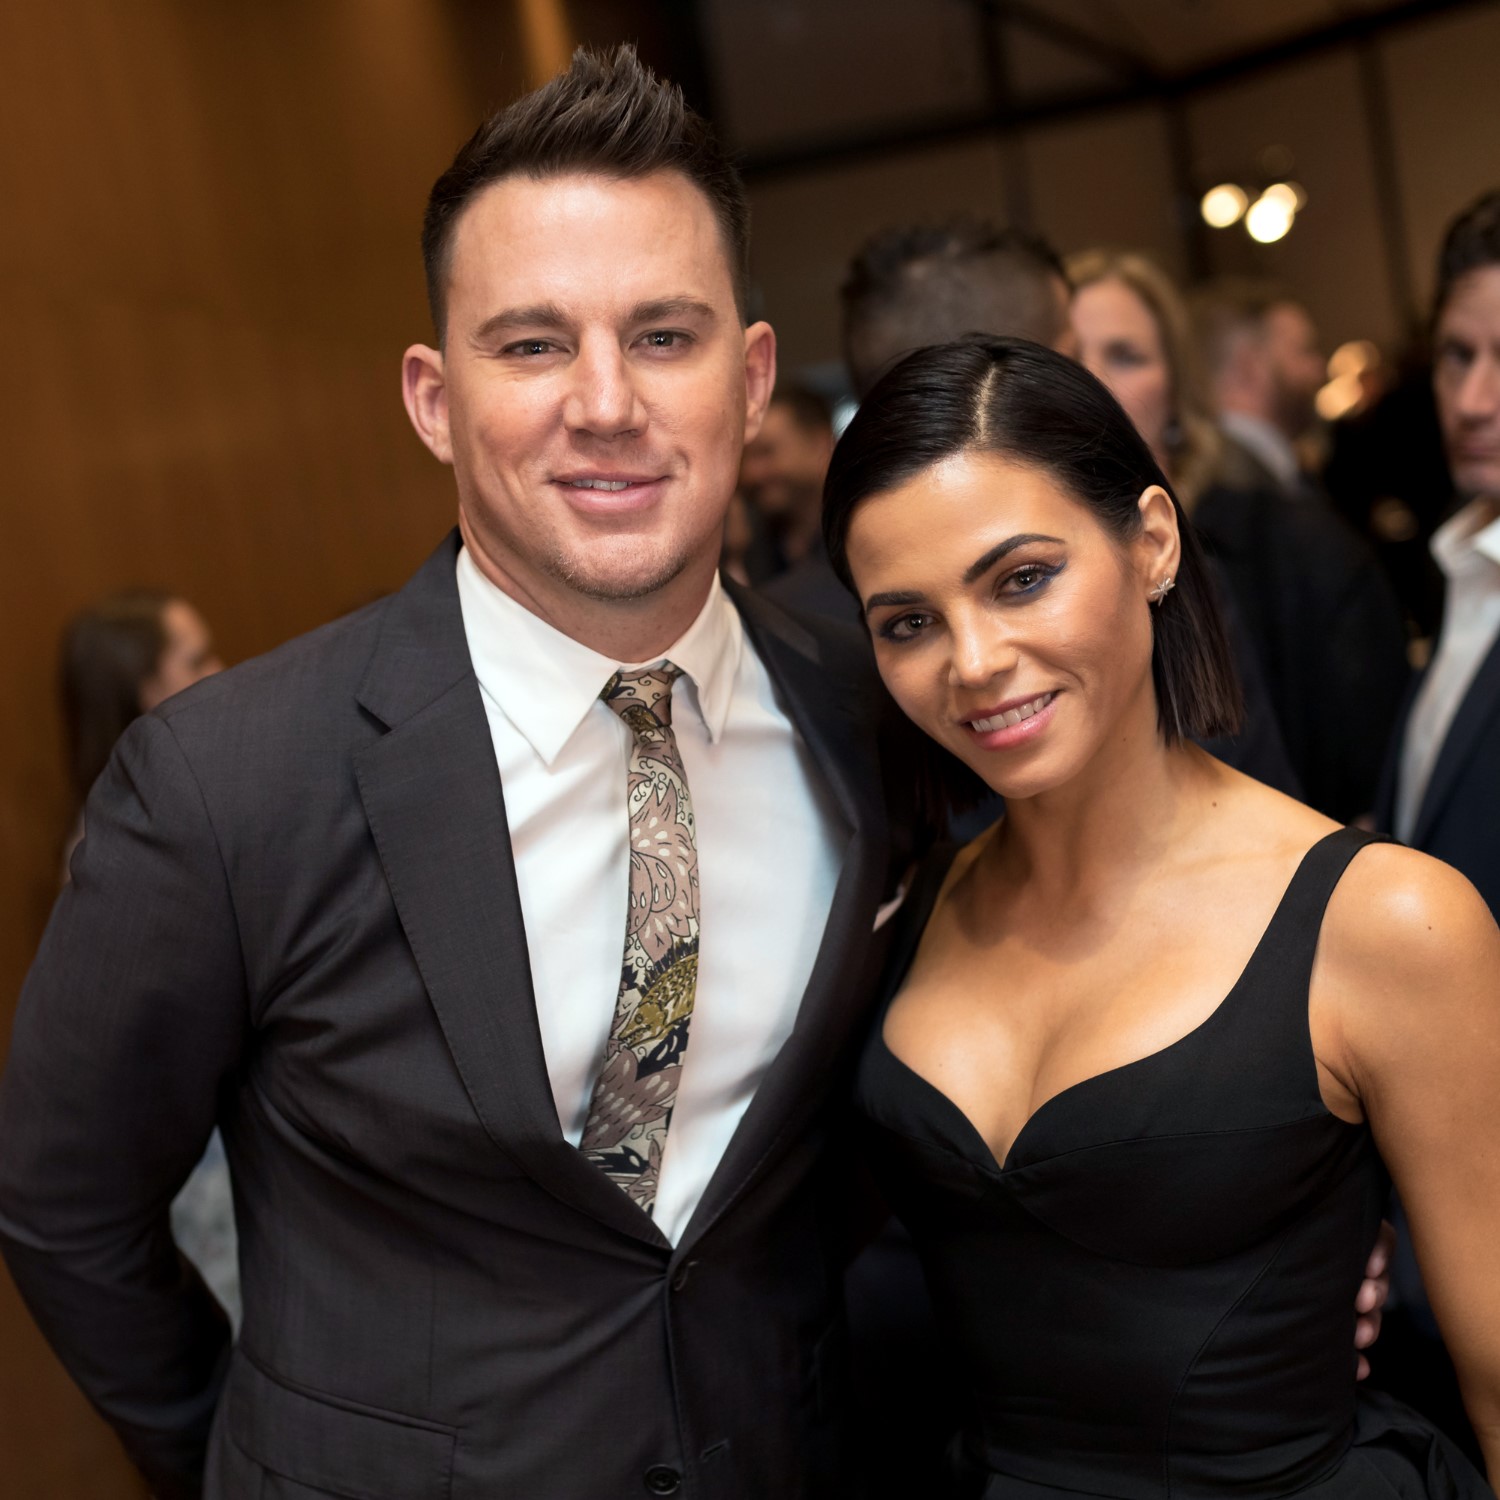 Channing Tatum and his wife Jenna